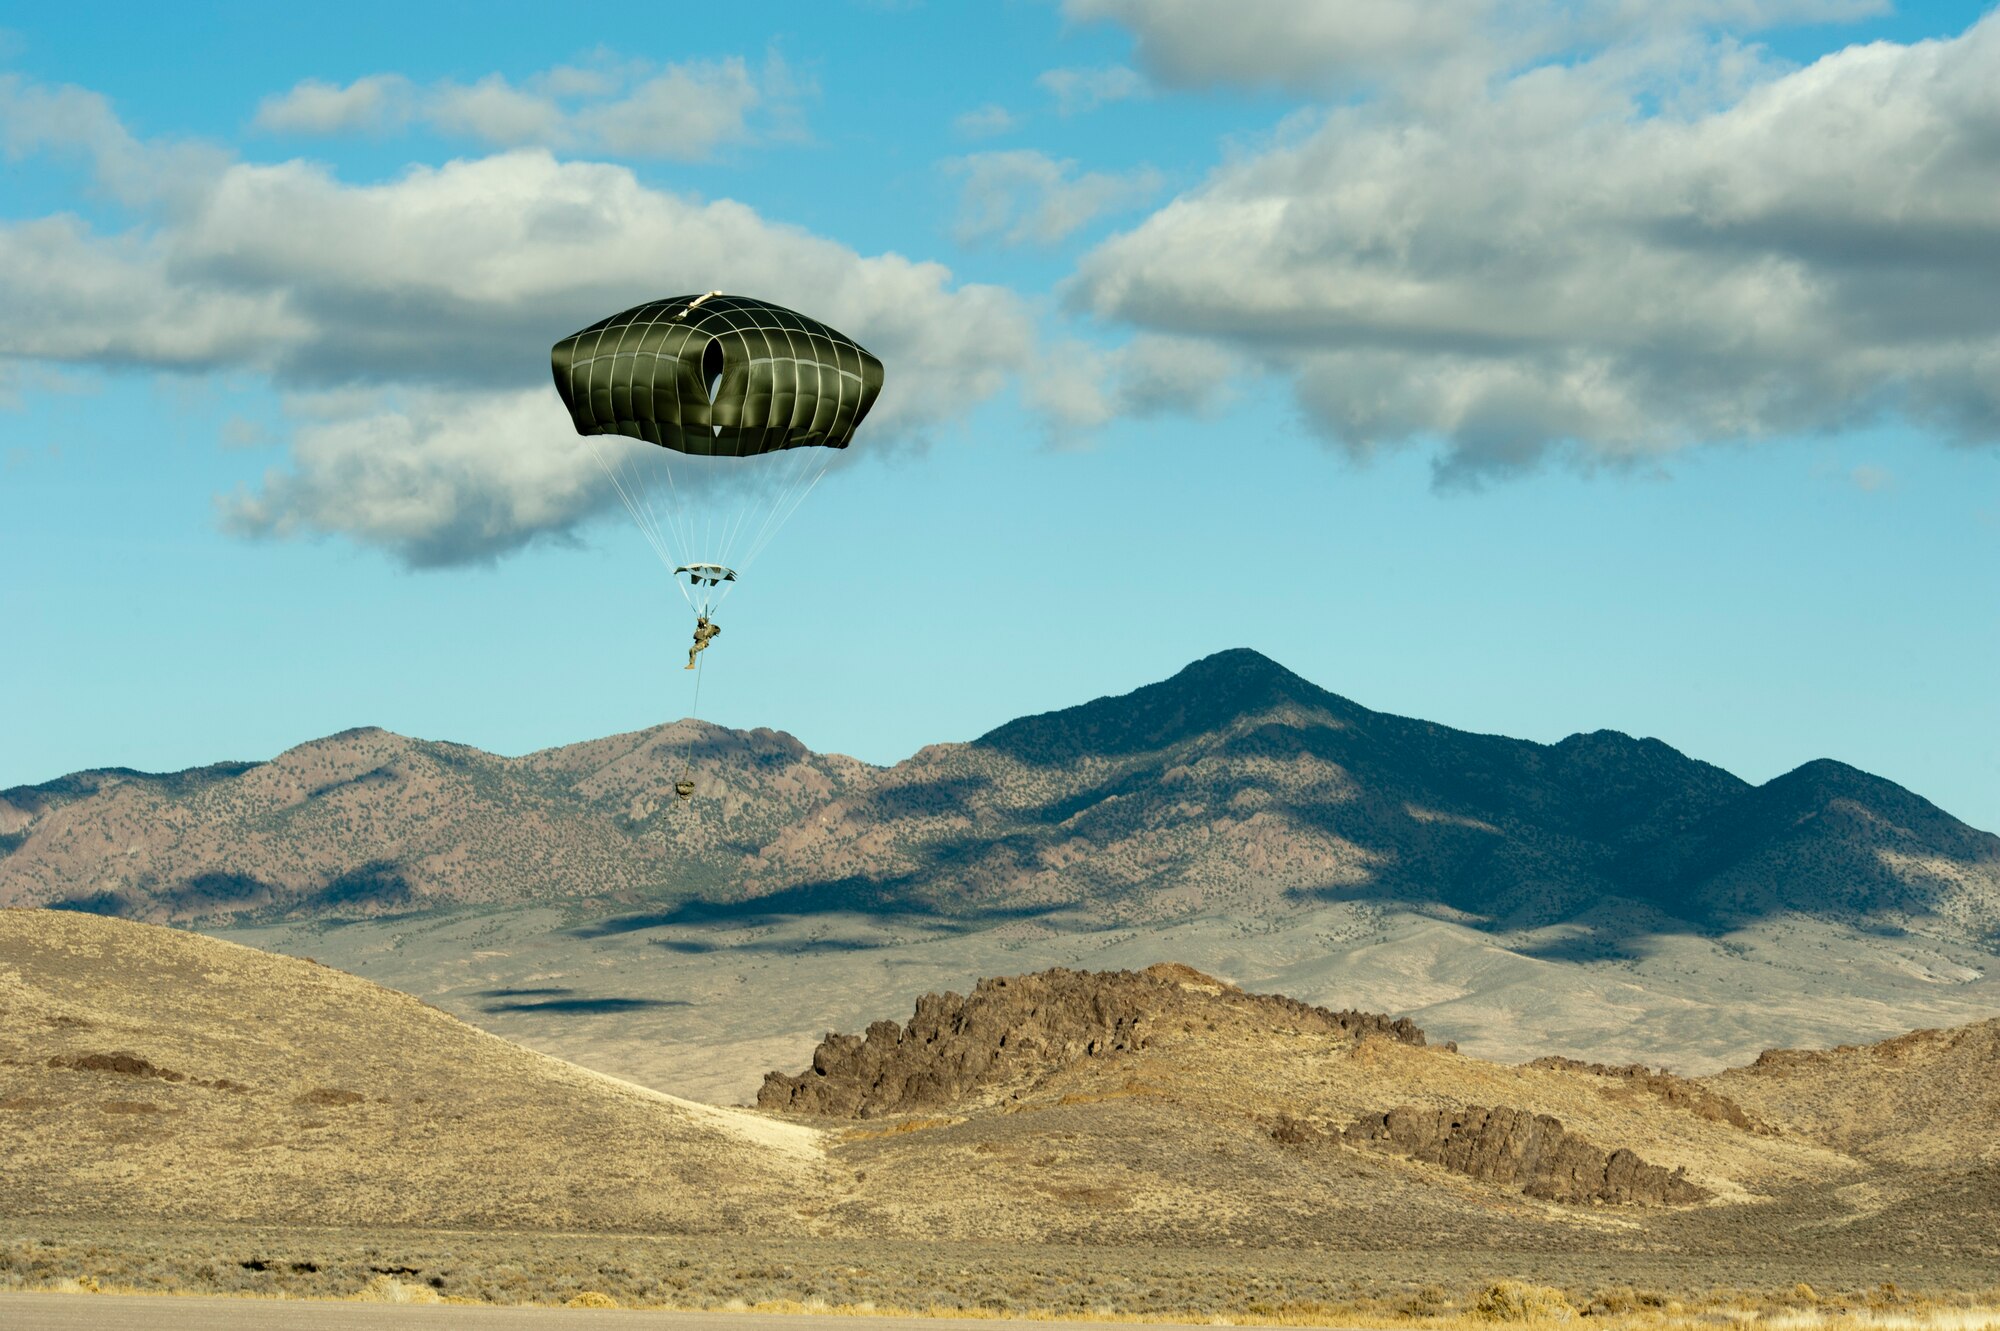 A paratrooper assigned to the 3rd Brigade Combat Team, 82nd Airborne Division, Fort Bragg, N.C., comes in to land during the U.S. Air Force Weapons School's Joint Forcible Entry Exercise 14B over the Nevada Test and Training Range Dec. 6, 2014. JFEX is a USAF Weapons School large-scale air mobility exercise in which participants plan and execute a complex air-land operation in a simulated contested battlefield. (U.S. Air Force photo by Senior Airman Timothy Young)